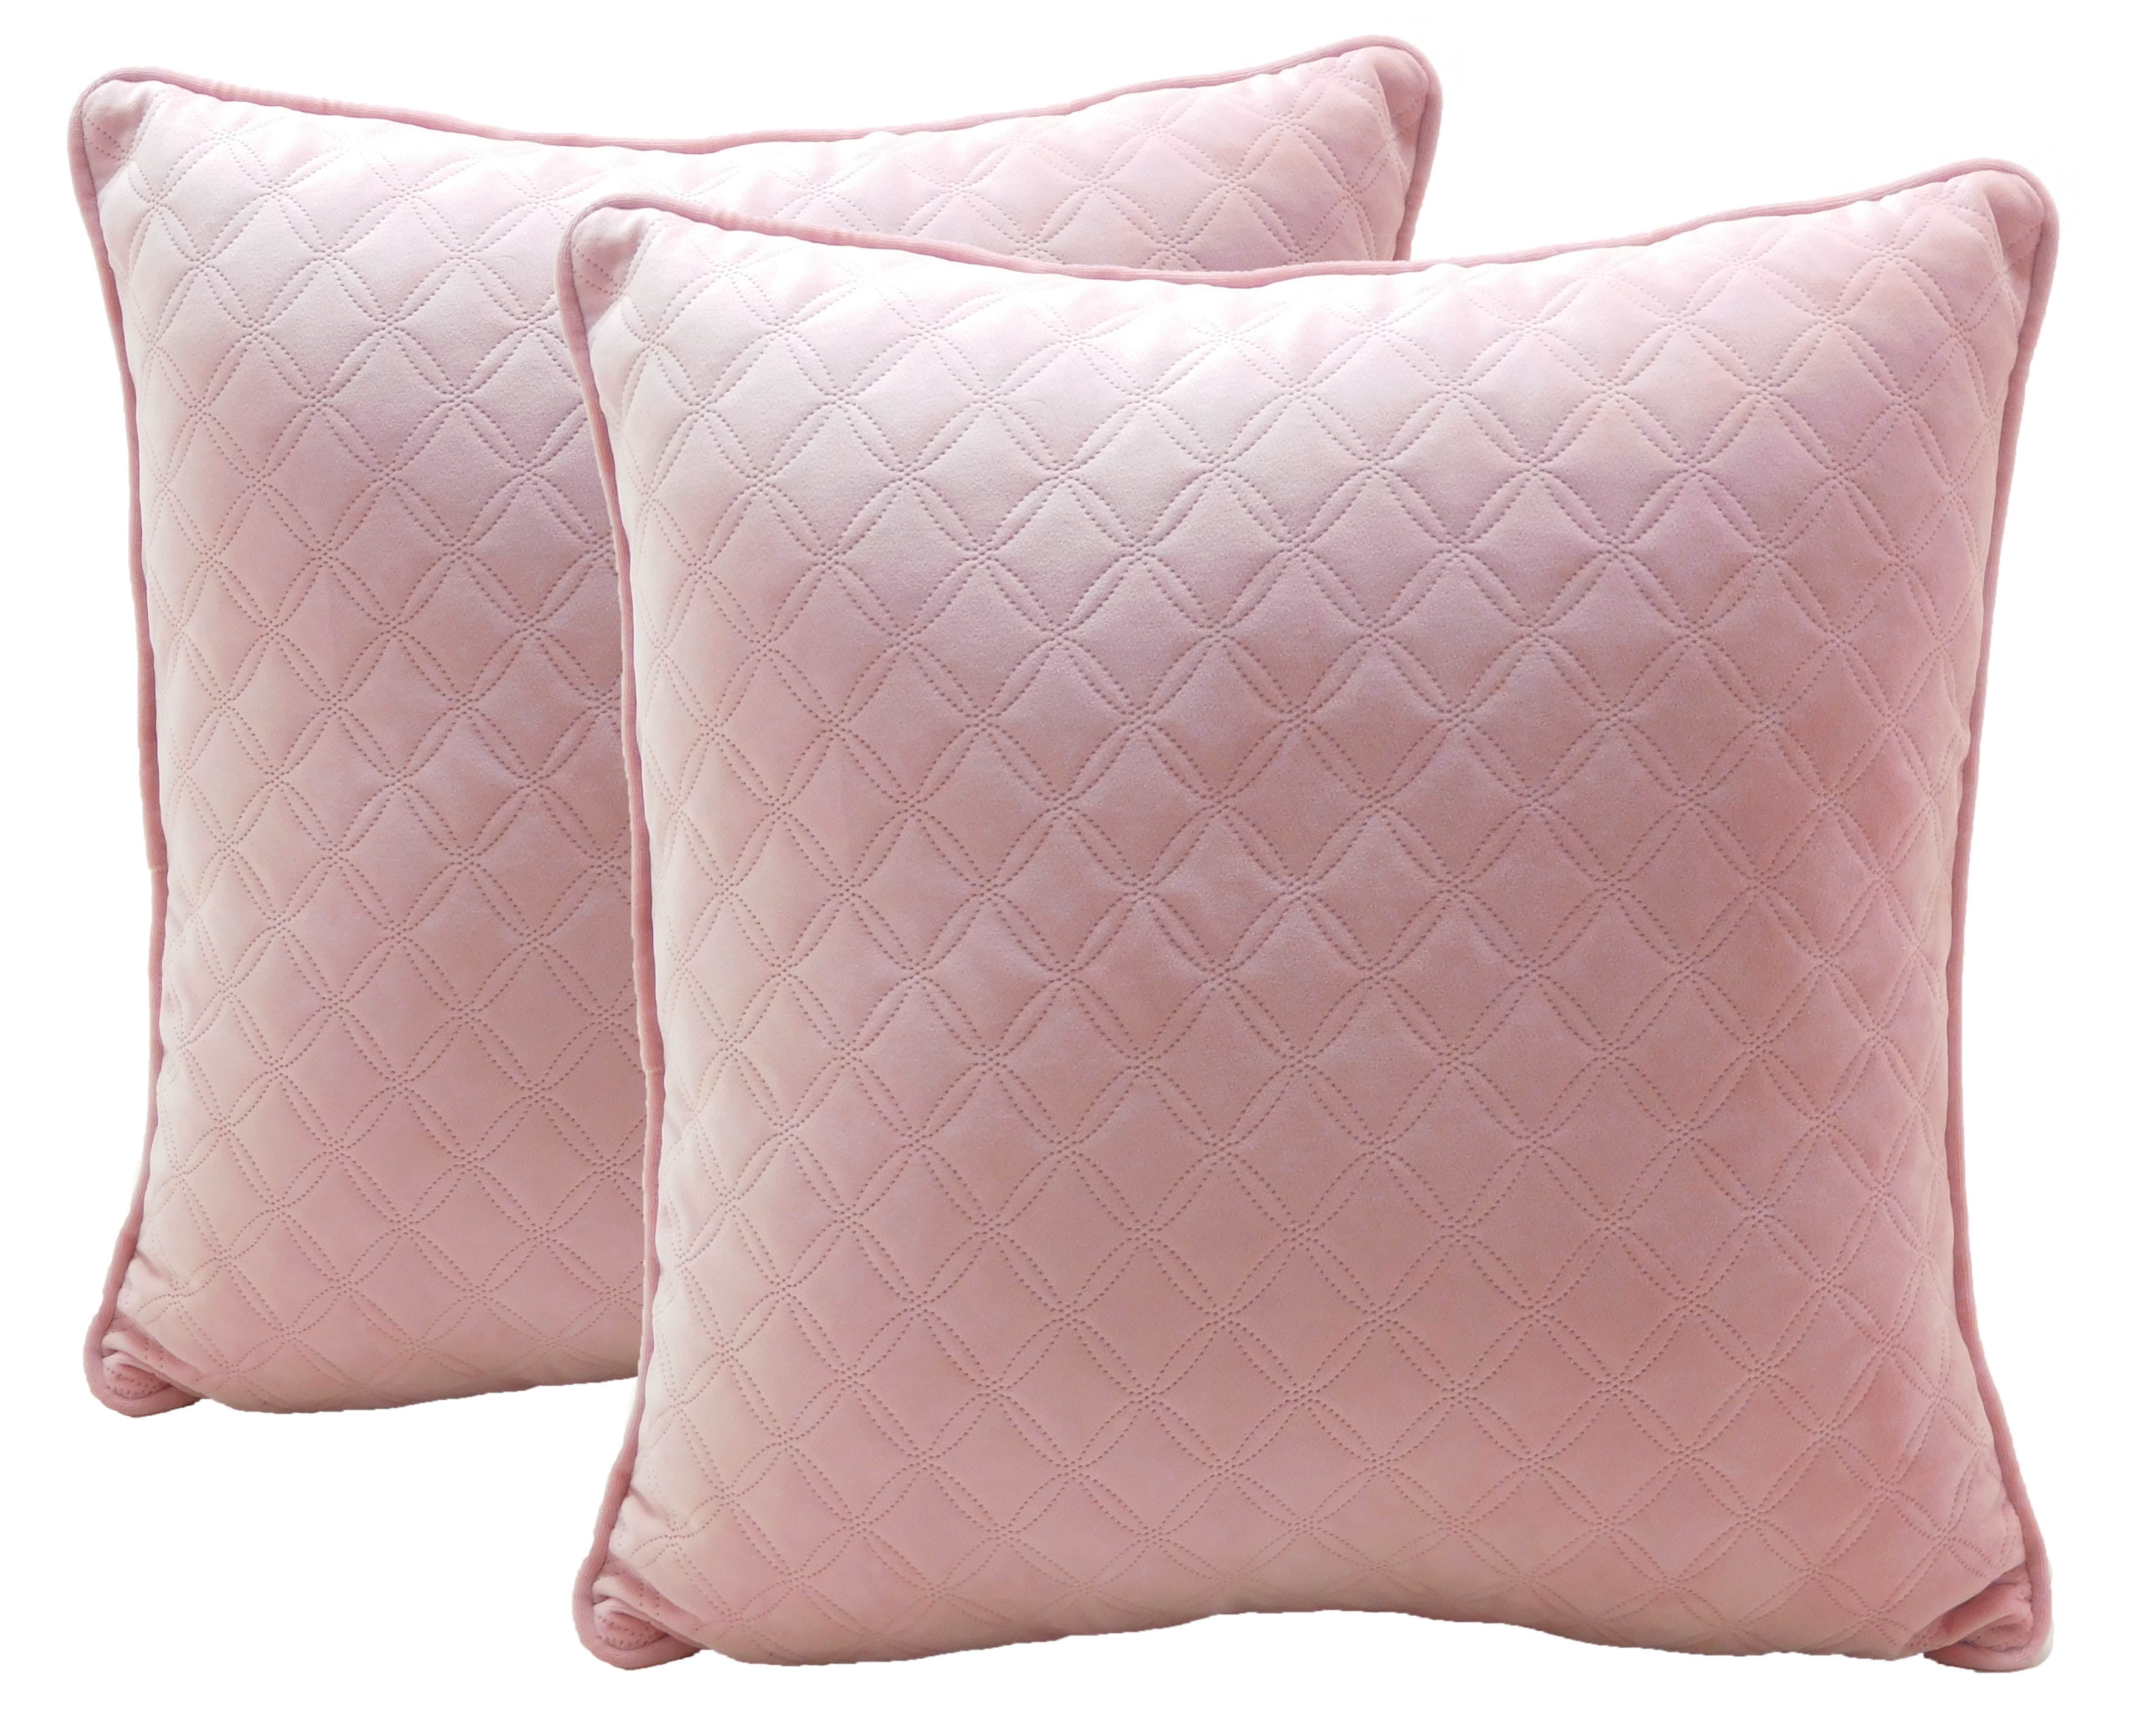 Better Homes & Gardens Quilted Velvet Decorative Square Throw Pillows, 19  x 19, Pack of 2, Petal Pink 